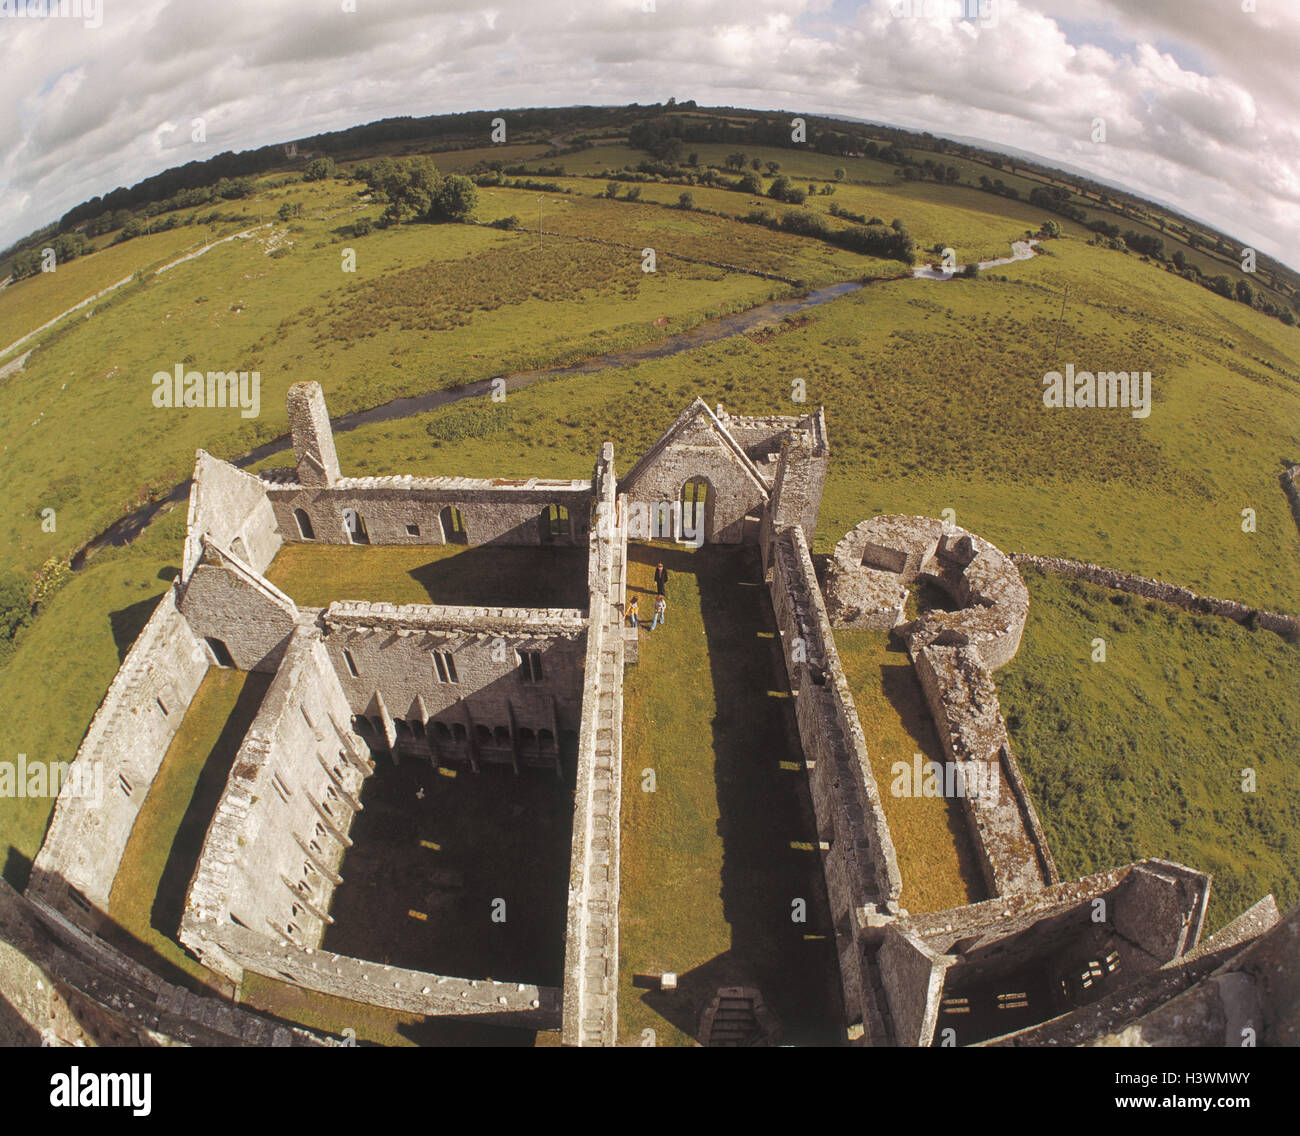 Ireland, close Ennis, Quinn Abbey, Fisheye, Europe, Nordwesteuropa, Irishman's country, Westirland, county Clare, Franciscan's cloister, cloister, cloister plant, ruin, architecture, culture, place of interest, visitor, tourist, view, view, width, distanc Stock Photo